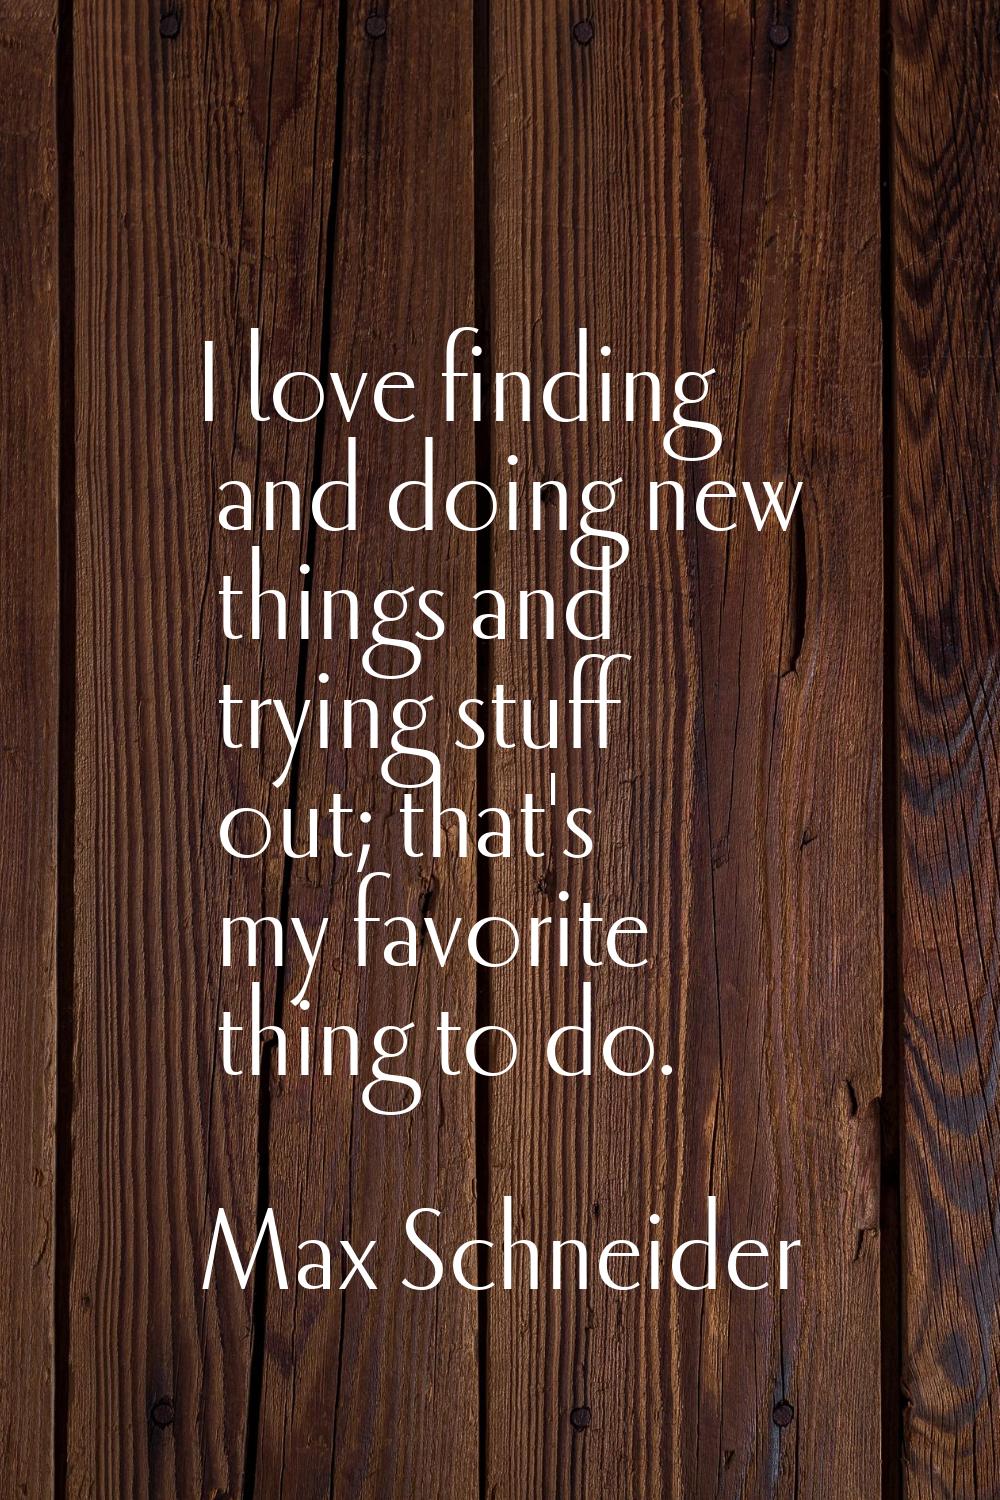 I love finding and doing new things and trying stuff out; that's my favorite thing to do.